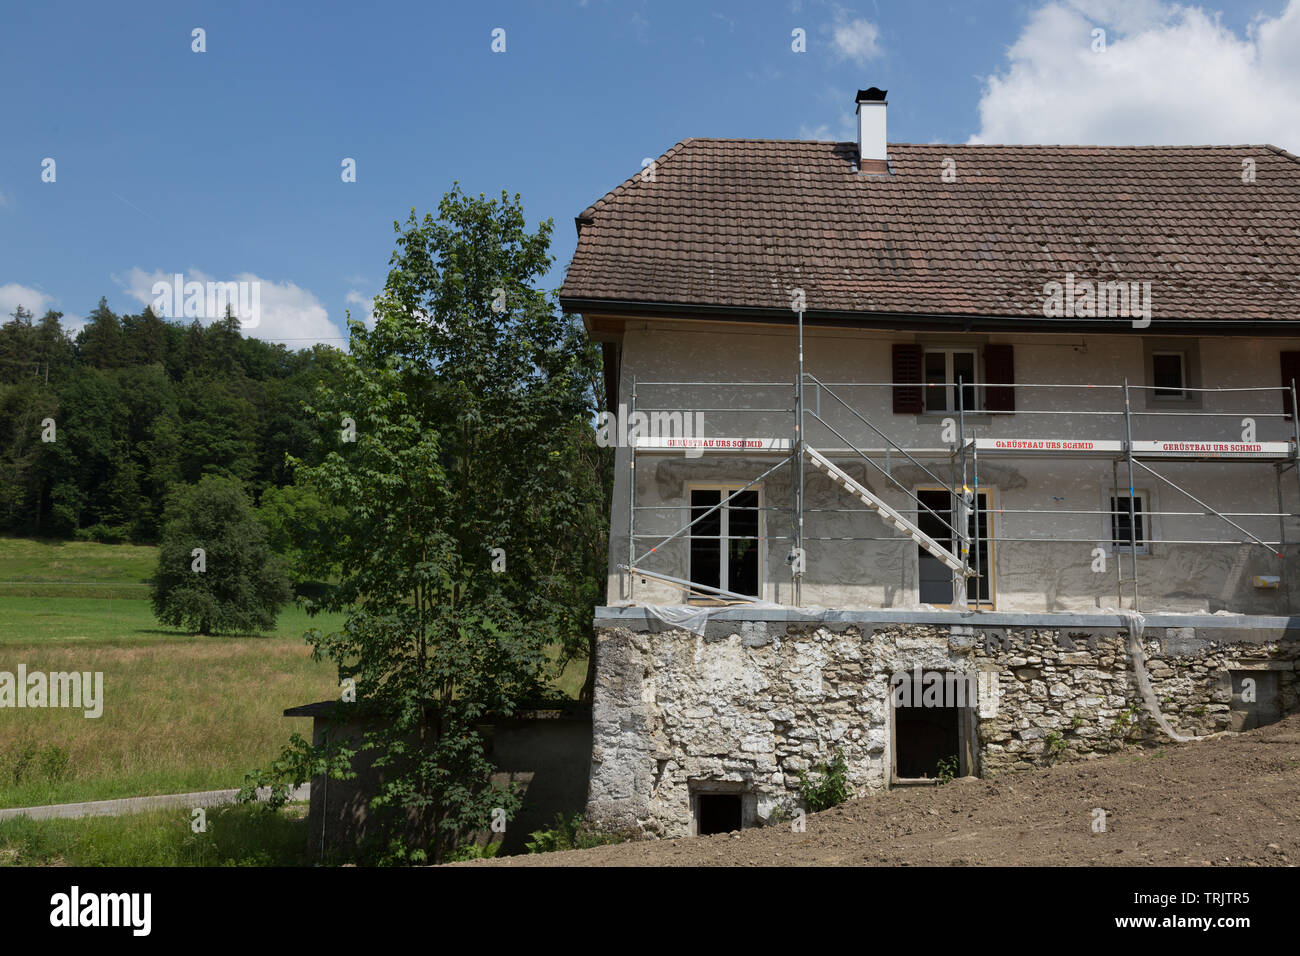 An old 19th century Swiss farm house being remodeled in Aargau, Switzerland. Stock Photo